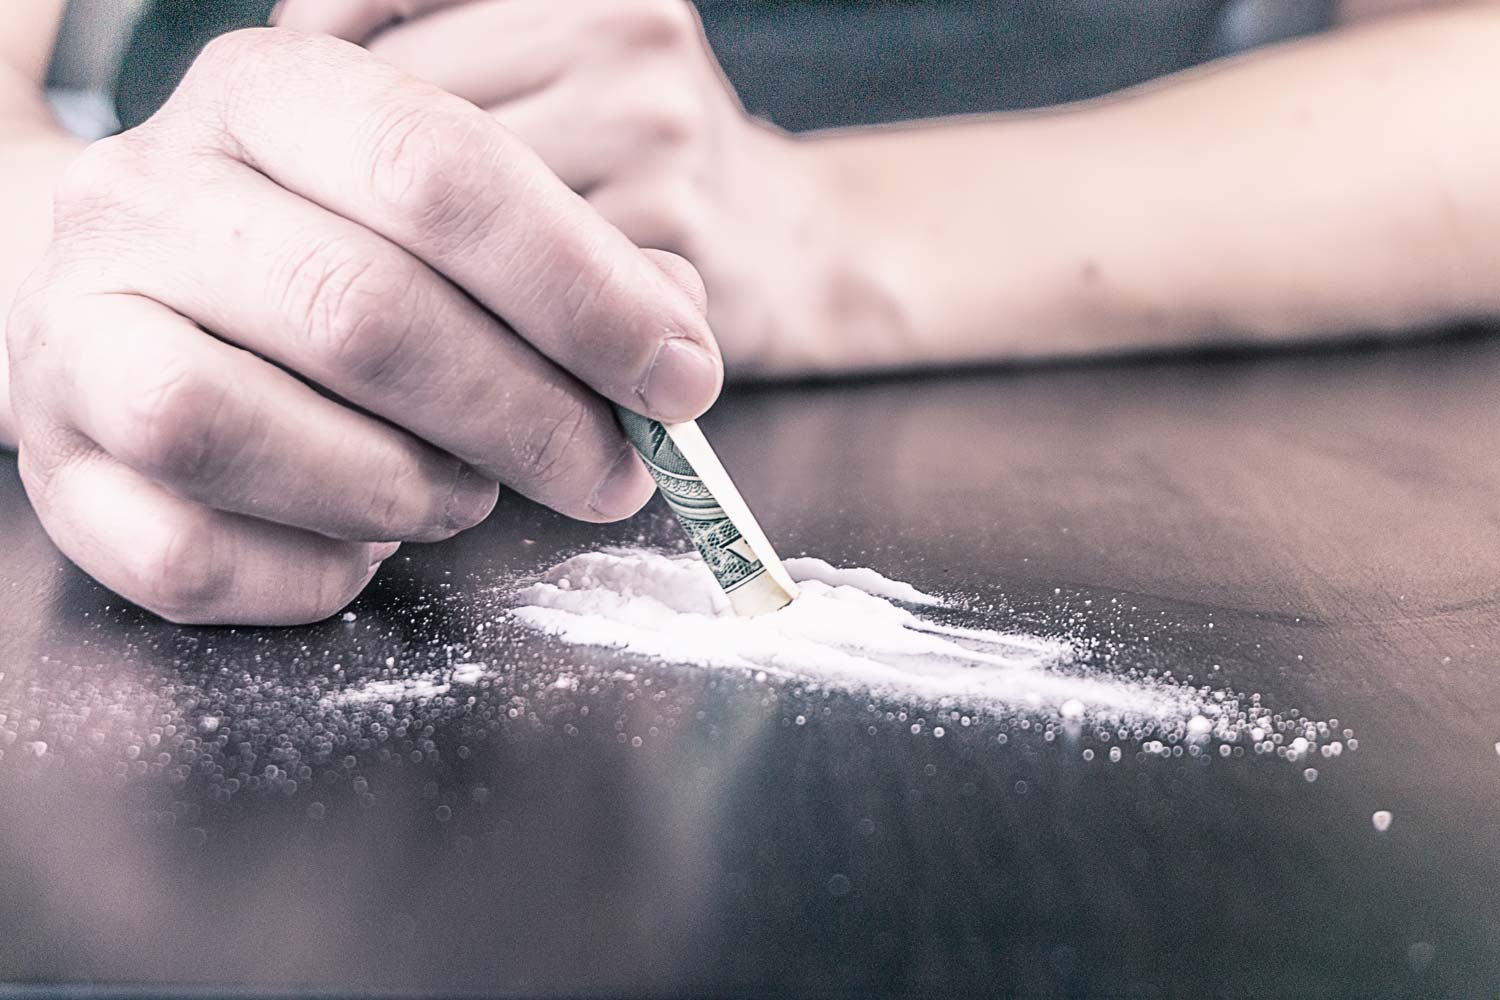 I Don’t Want to Live with My Drug Addict Husband